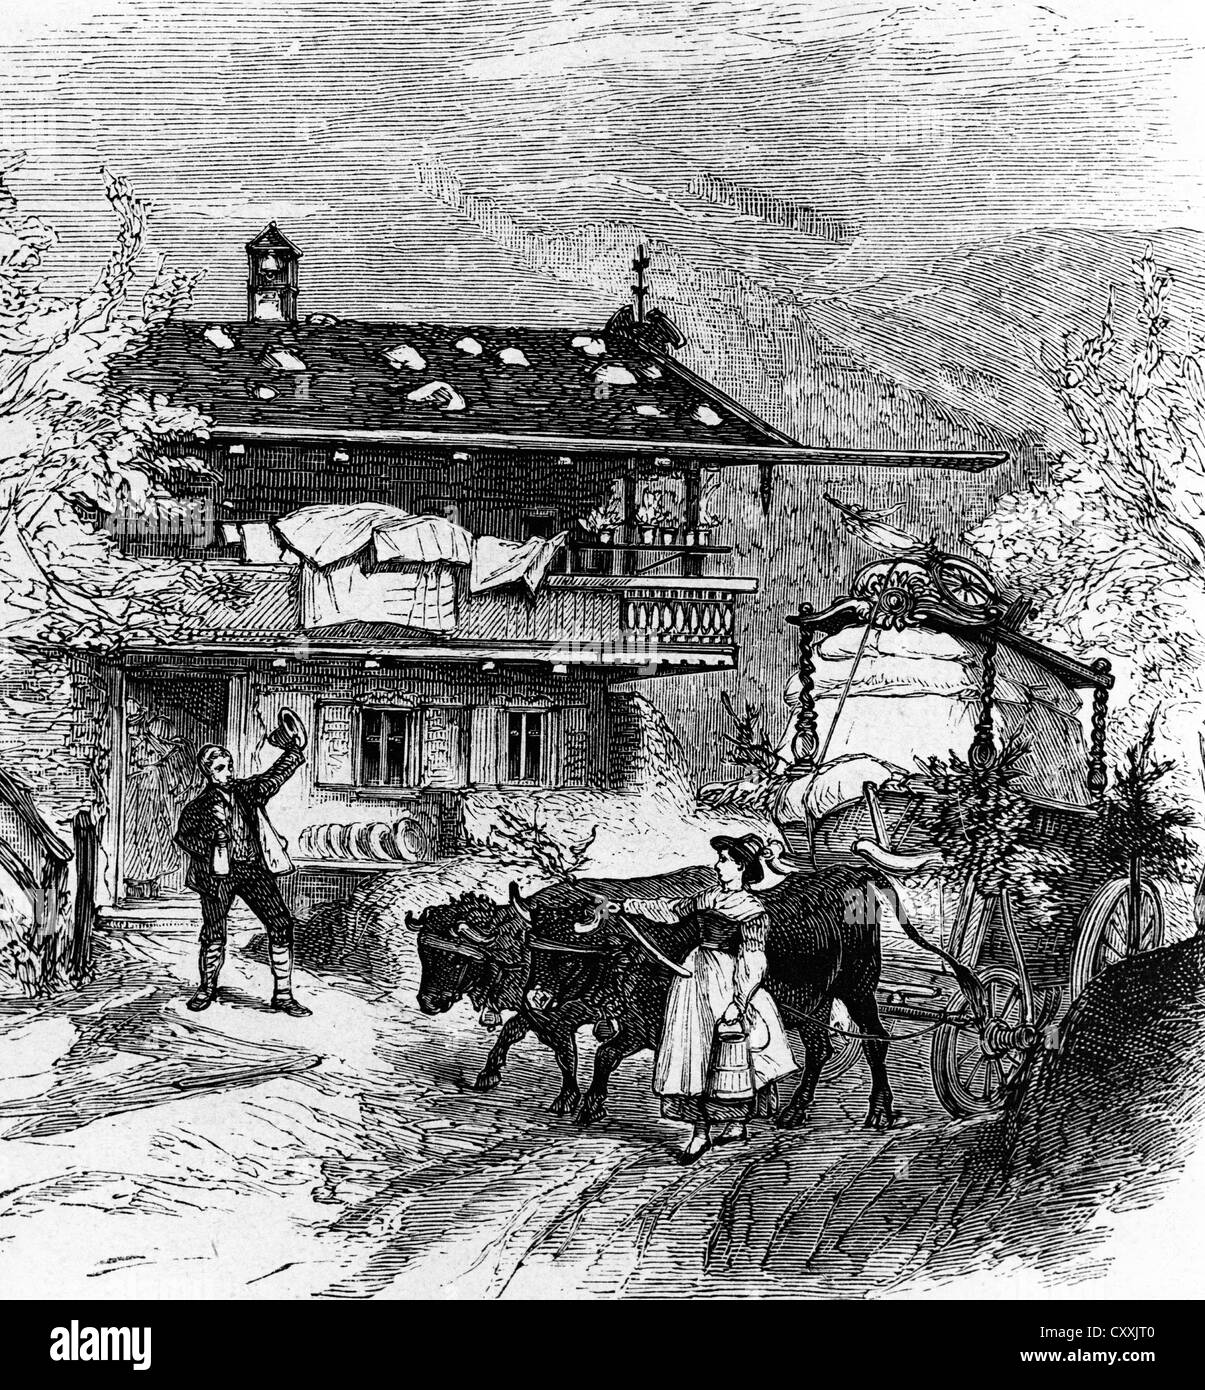 Bridal wagon transporting the dowry in front of the groom's house, Lenggries, engraving, c. 1830, Upper Bavaria, Bavaria Stock Photo